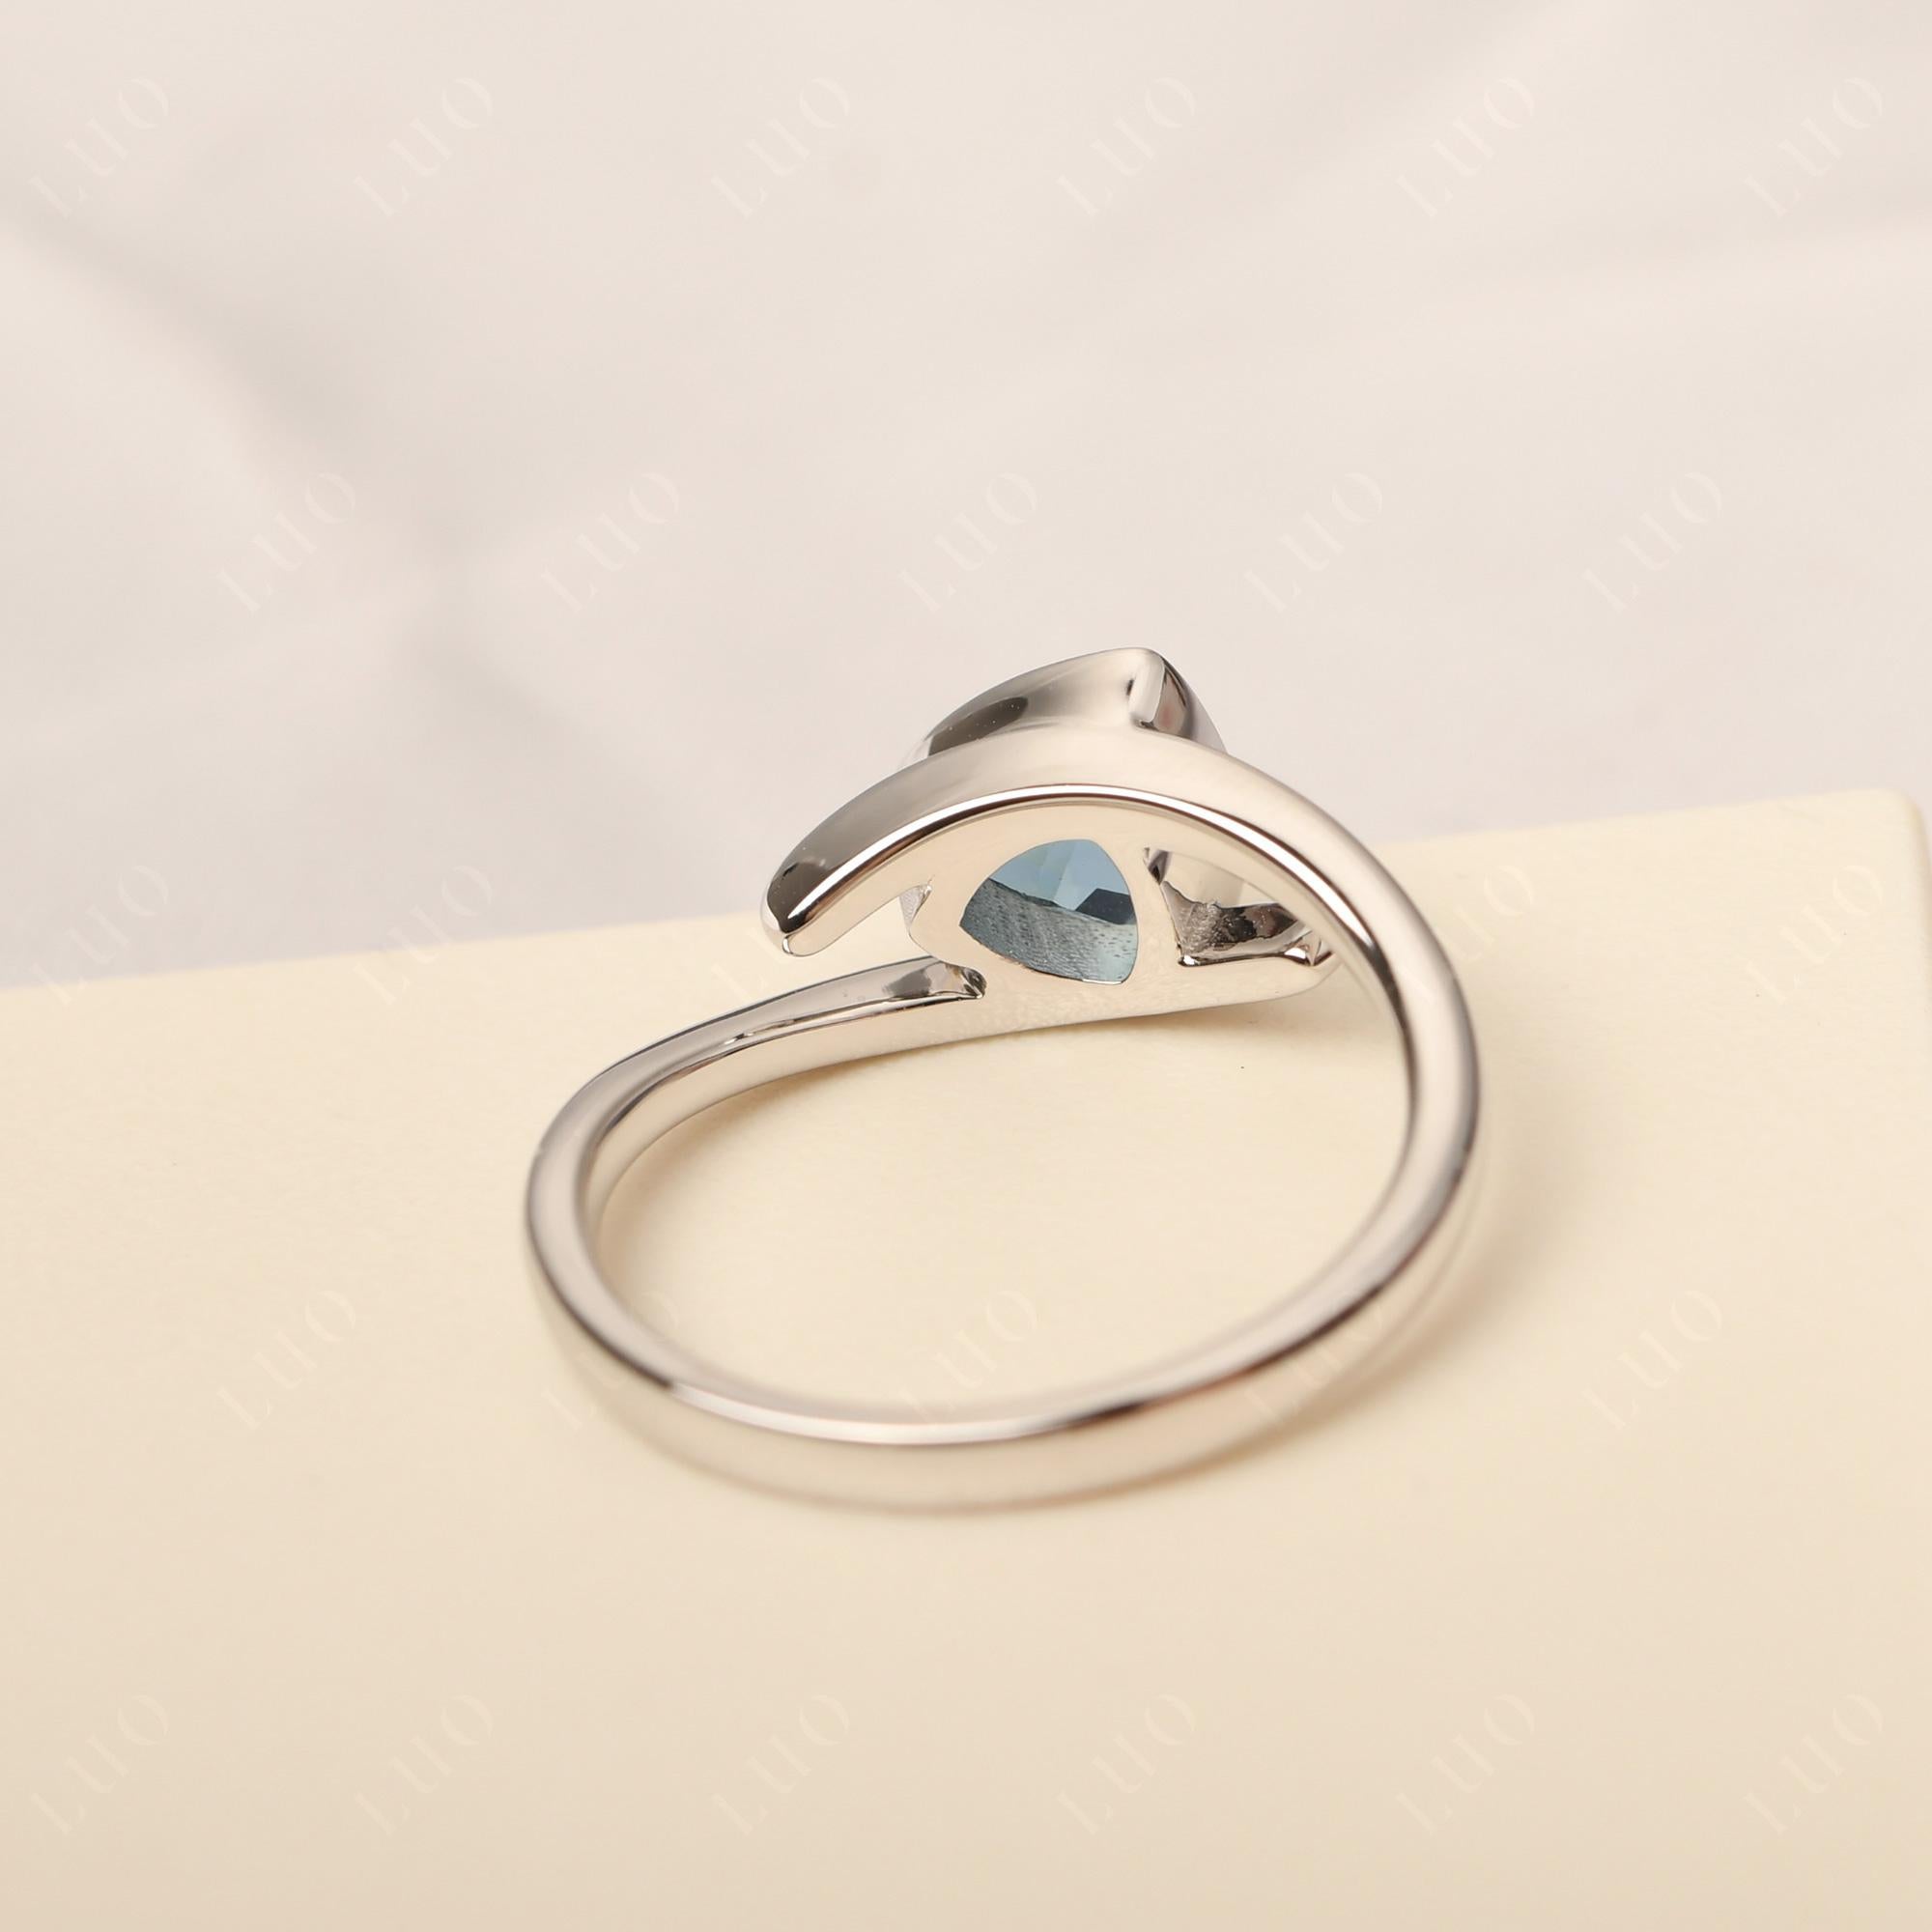 London Blue Topaz Bezel Set Bypass Solitaire Ring - LUO Jewelry